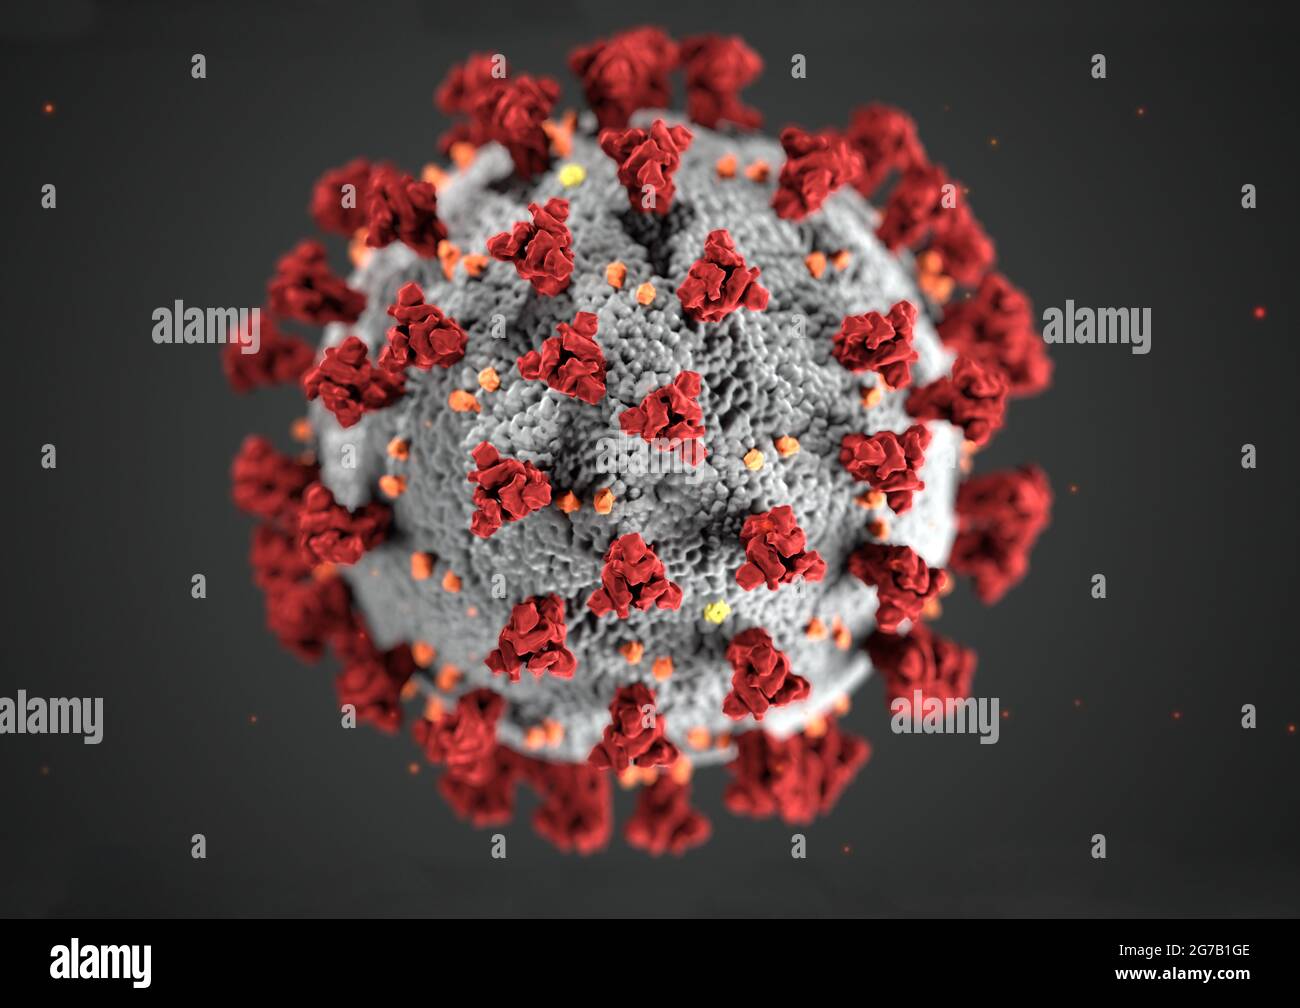 This illustration reveals ultrastructural morphology exhibited by coronaviruses.  A novel coronavirus, named Severe Acute Respiratory Syndrome coronavirus 2 (SARS-CoV-2), was identified as the cause of an outbreak of respiratory illness first detected in Wuhan, China in 2019. The illness caused by this virus has been named coronavirus disease 2019 (COVID-19). An optimised and enhanced version of an image produced by the US Centers for Disease Control and Prevention / Credit: CDC Stock Photo